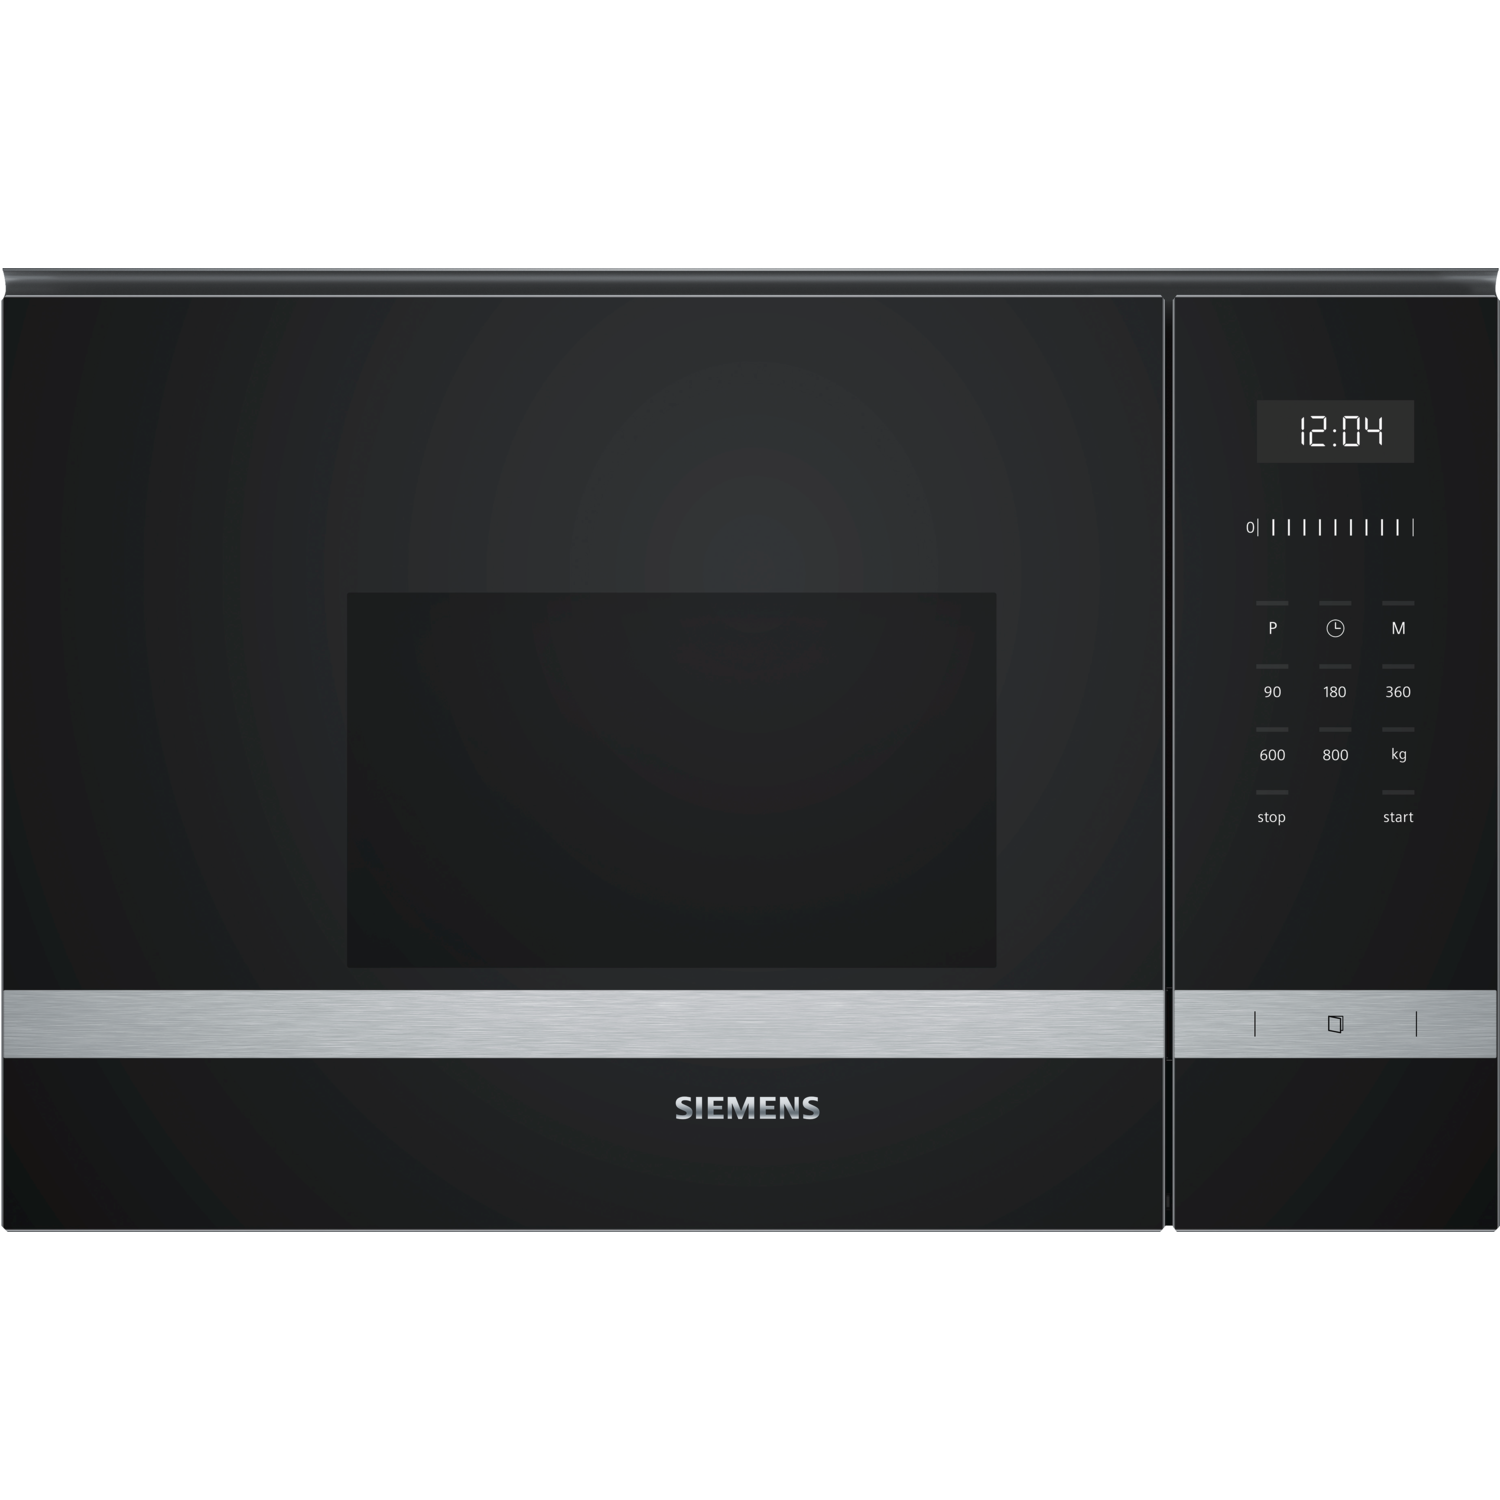 Siemens Bf525lms0b Iq500 20l Built In Microwave Oven For A 60cm